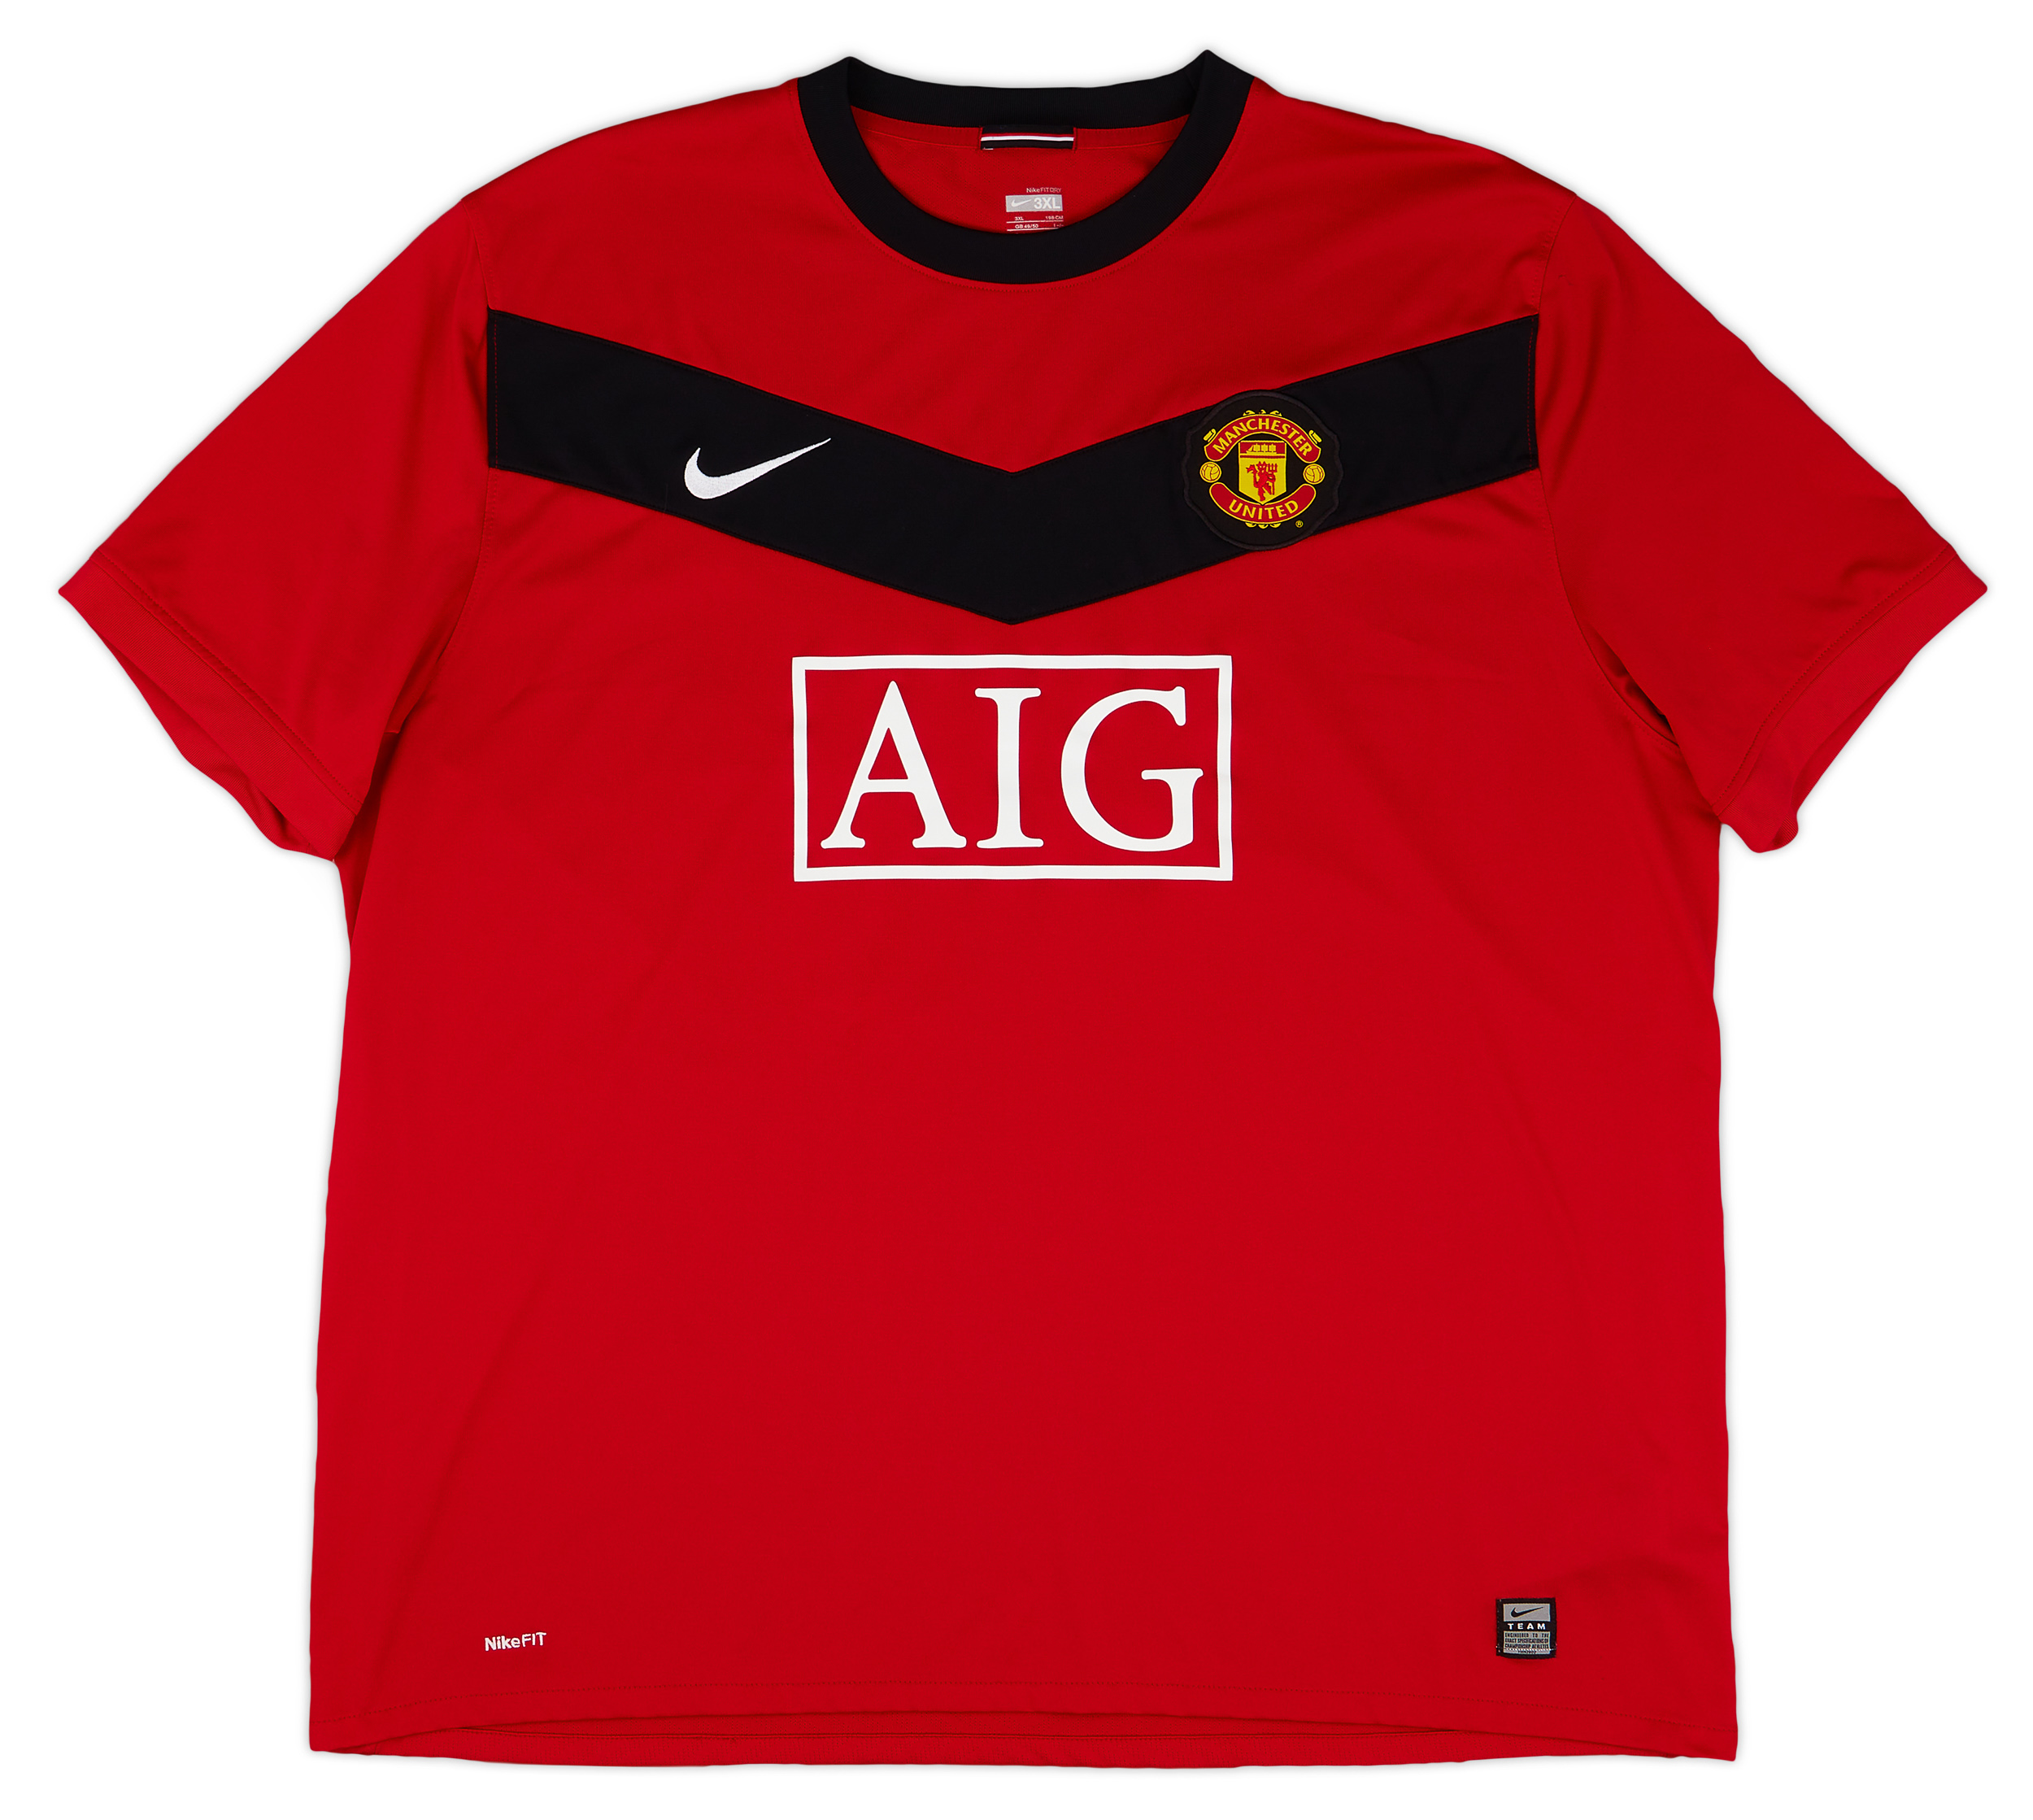 2009-10 Manchester United Home Shirt - 9/10 - ()